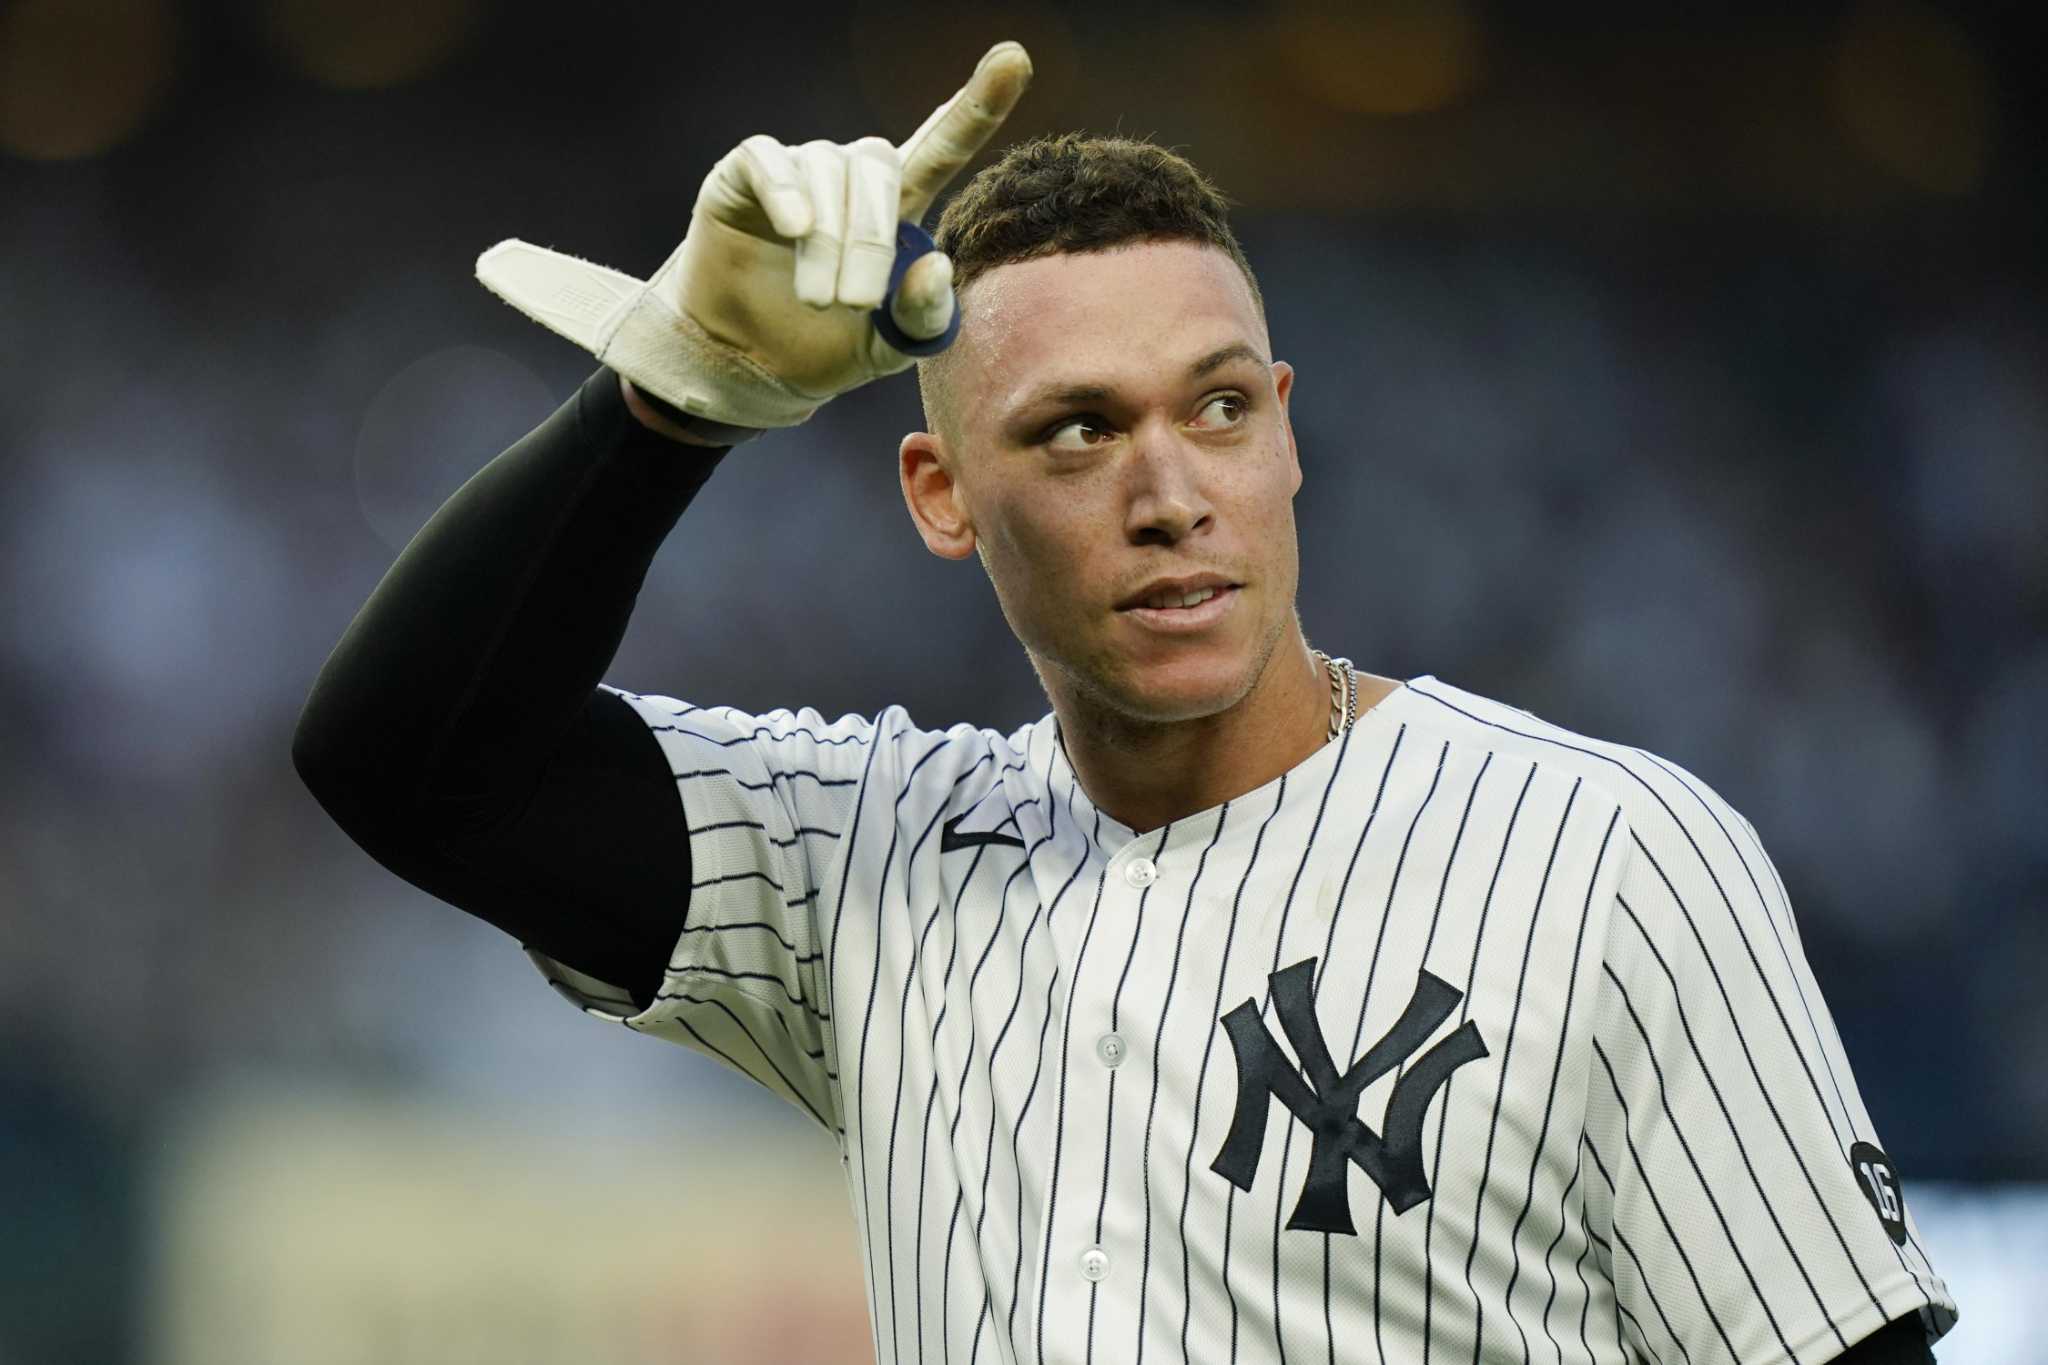 Giants contract offer to Aaron Judge revealed, and it's enormous